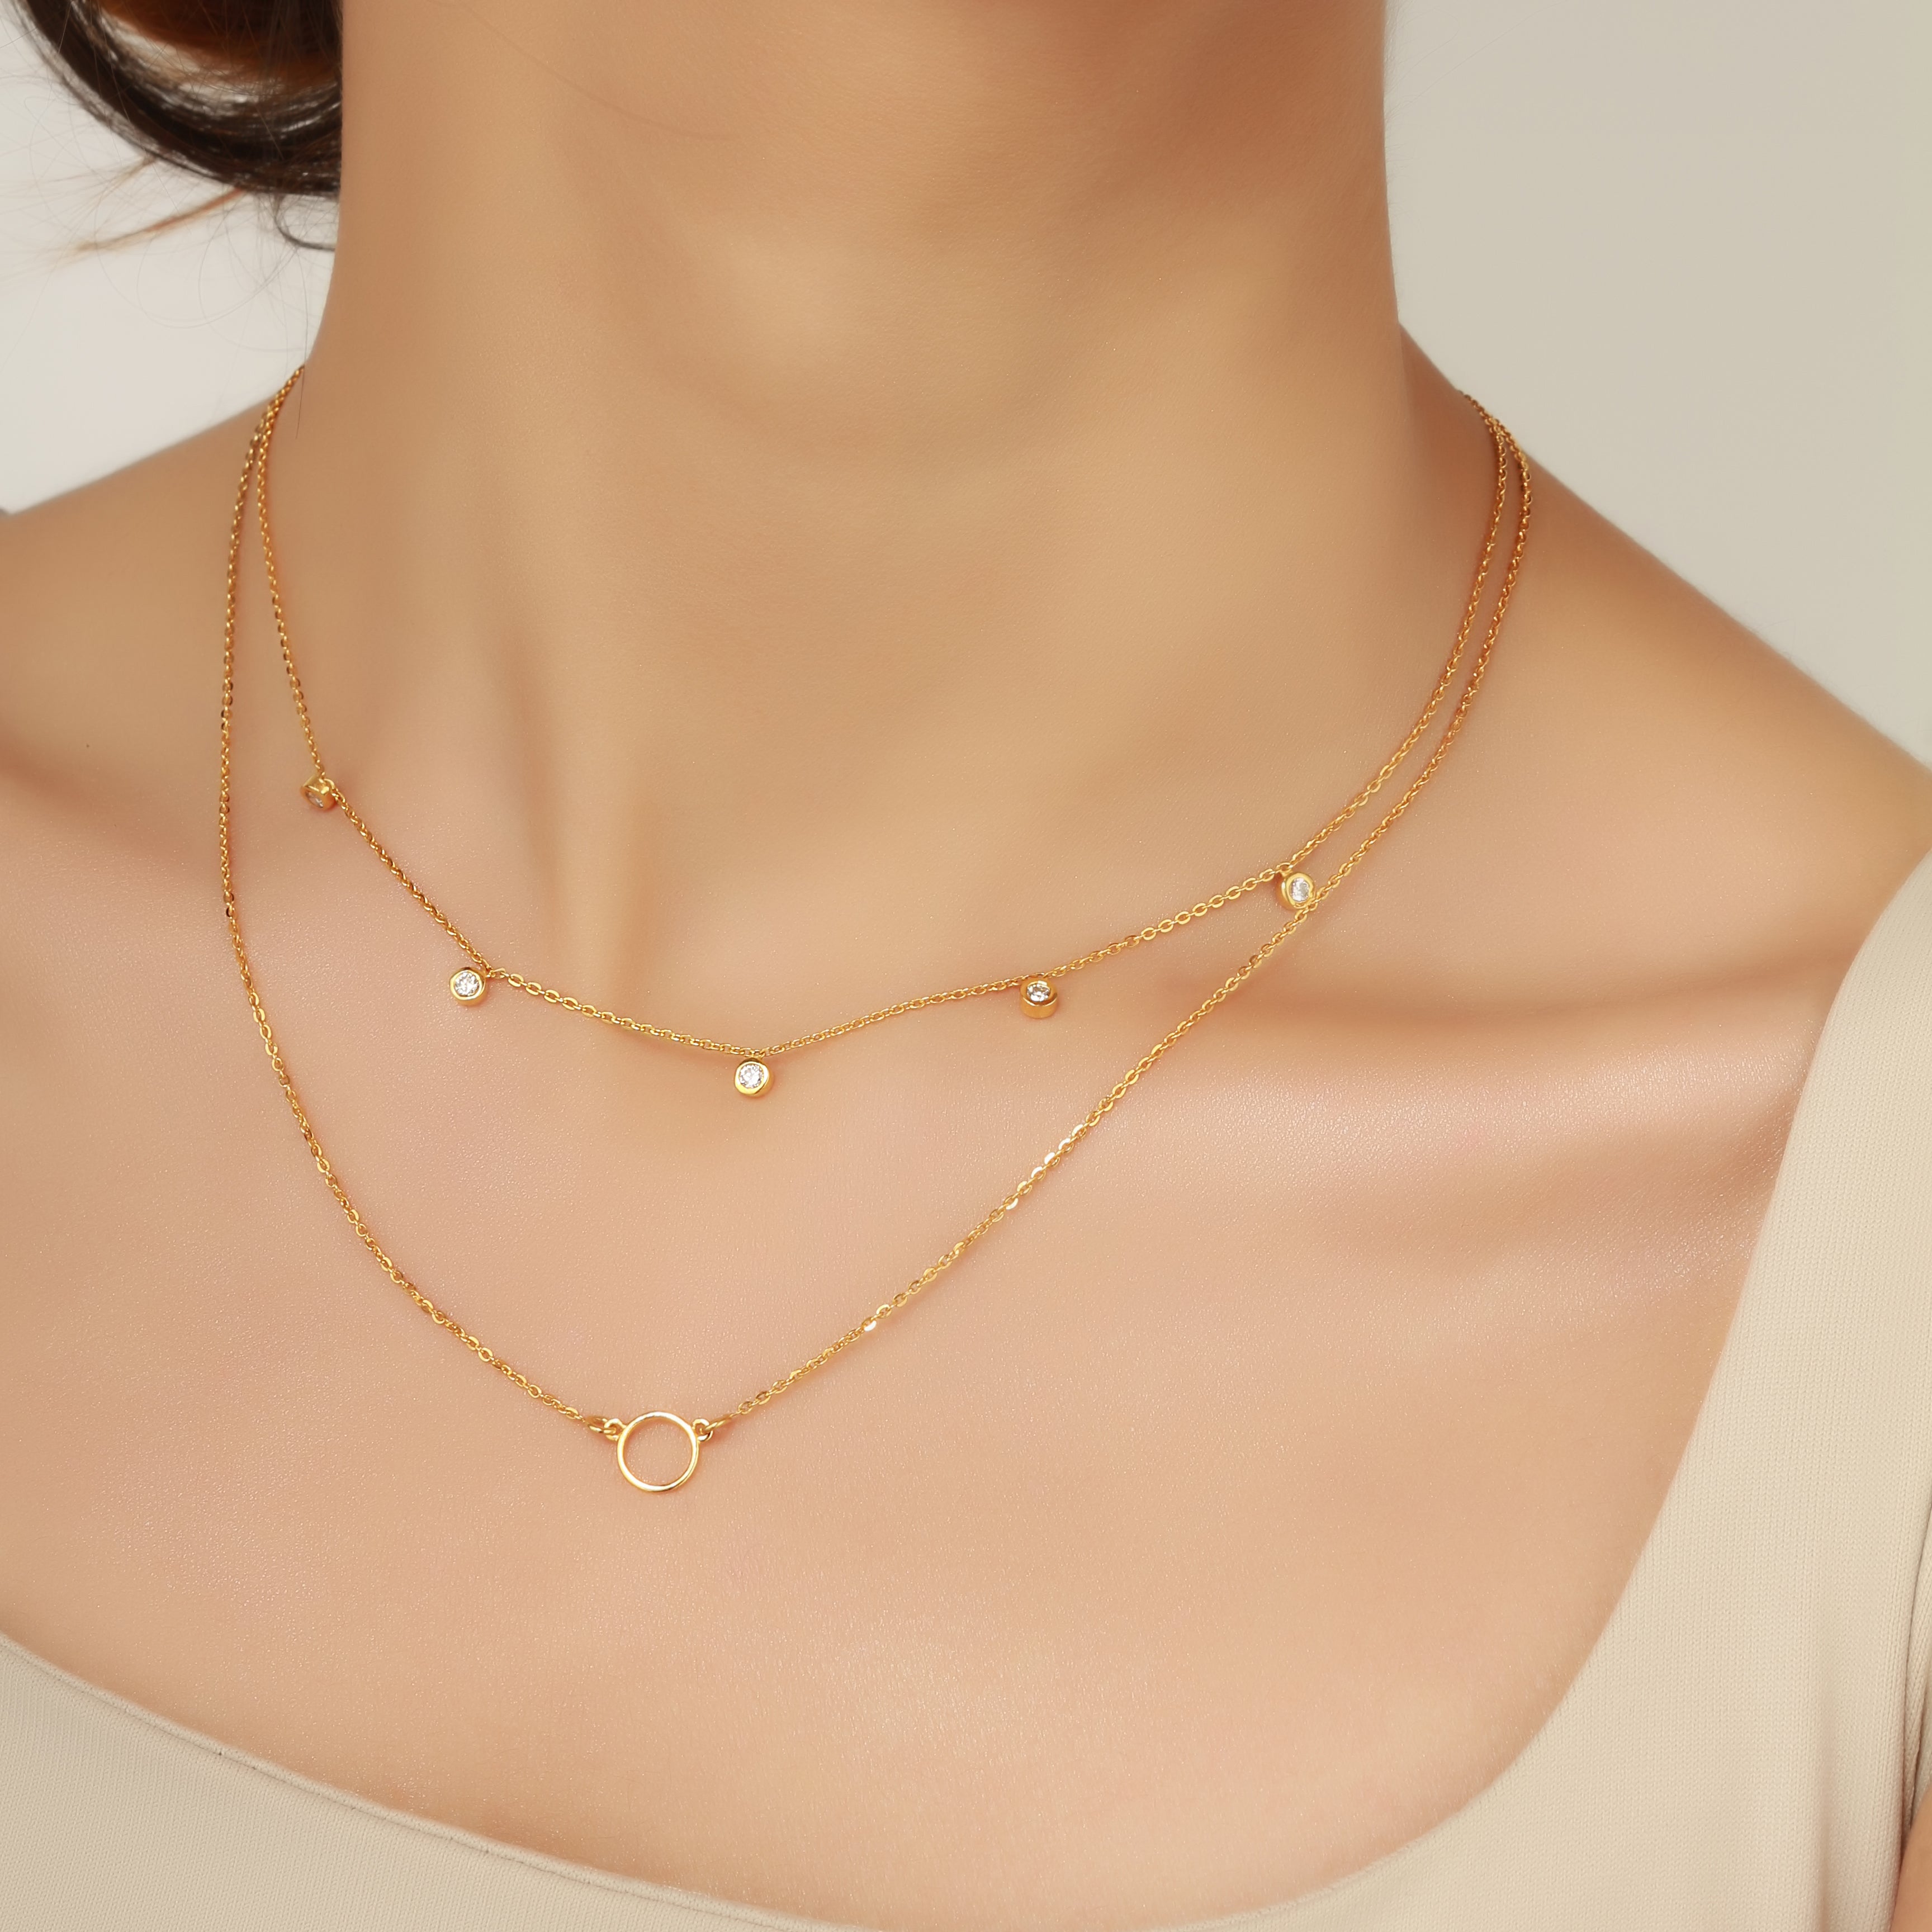 Circle necklace, gold necklace for women, fine jewellery